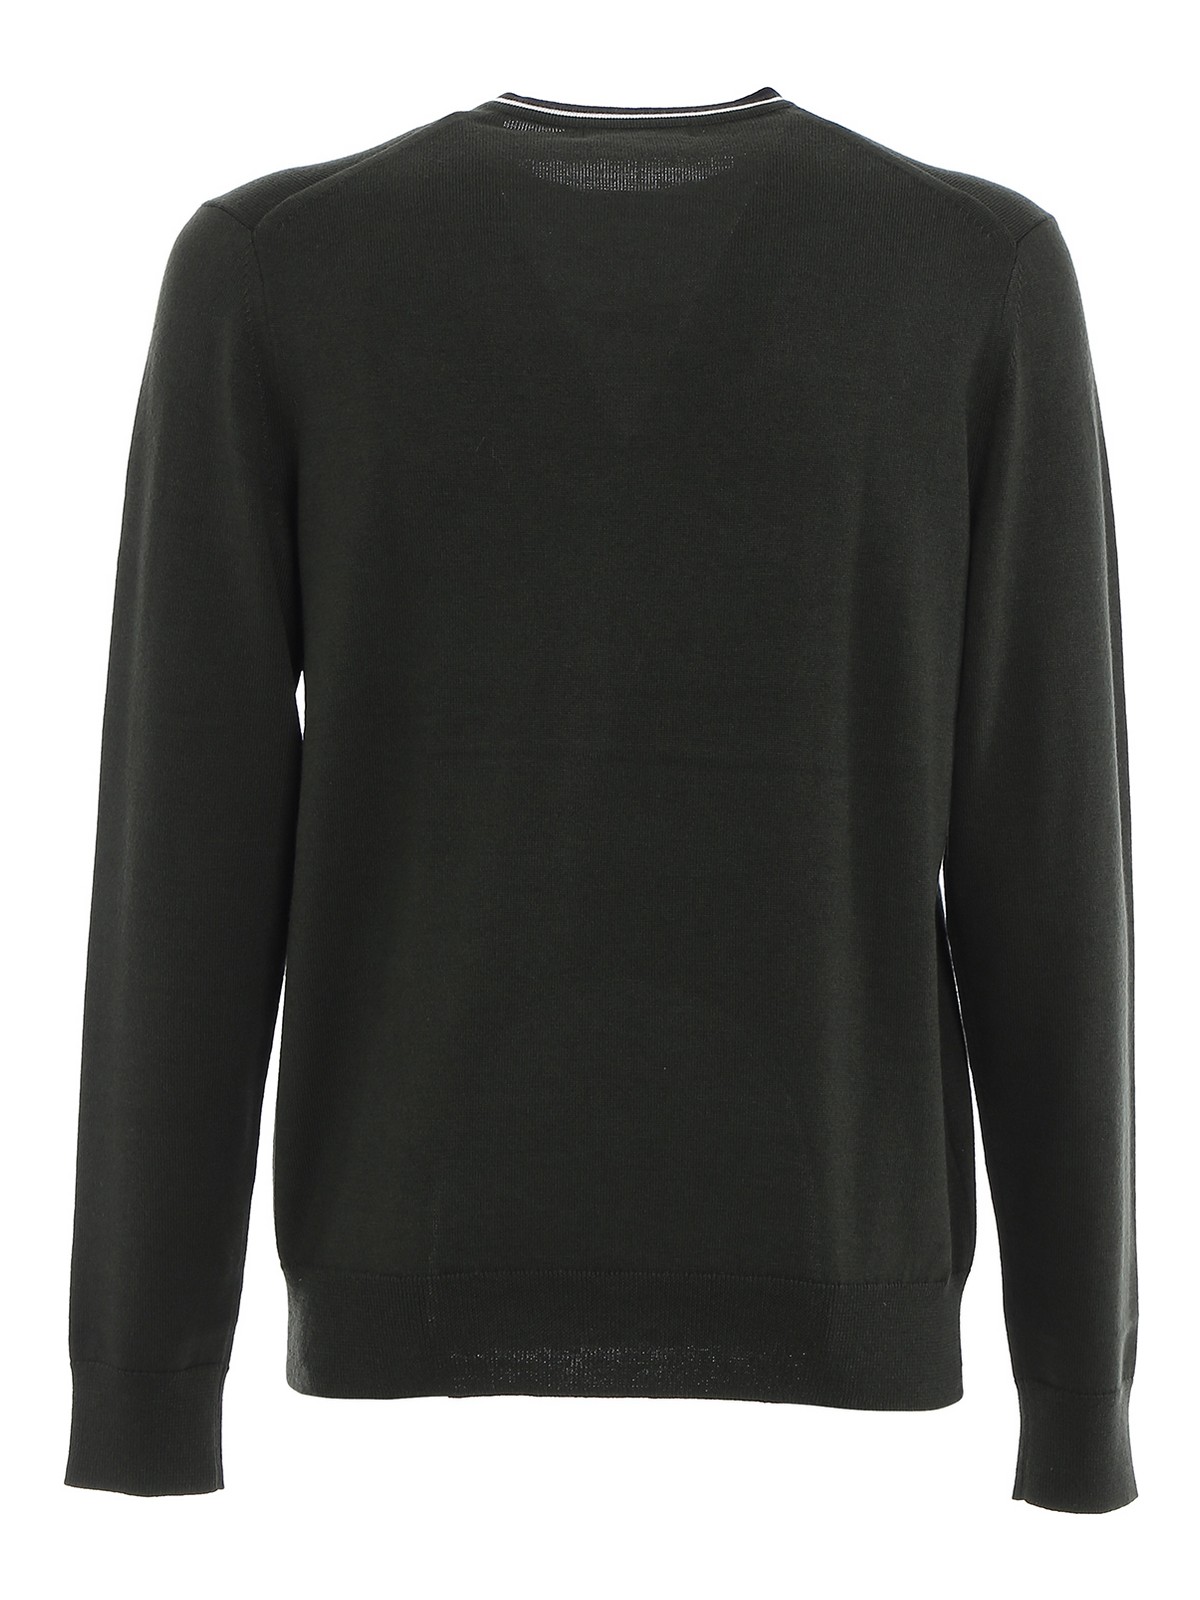 Fred Perry - Stocking stitch wool and cotton jumper - crew necks - K9601M12